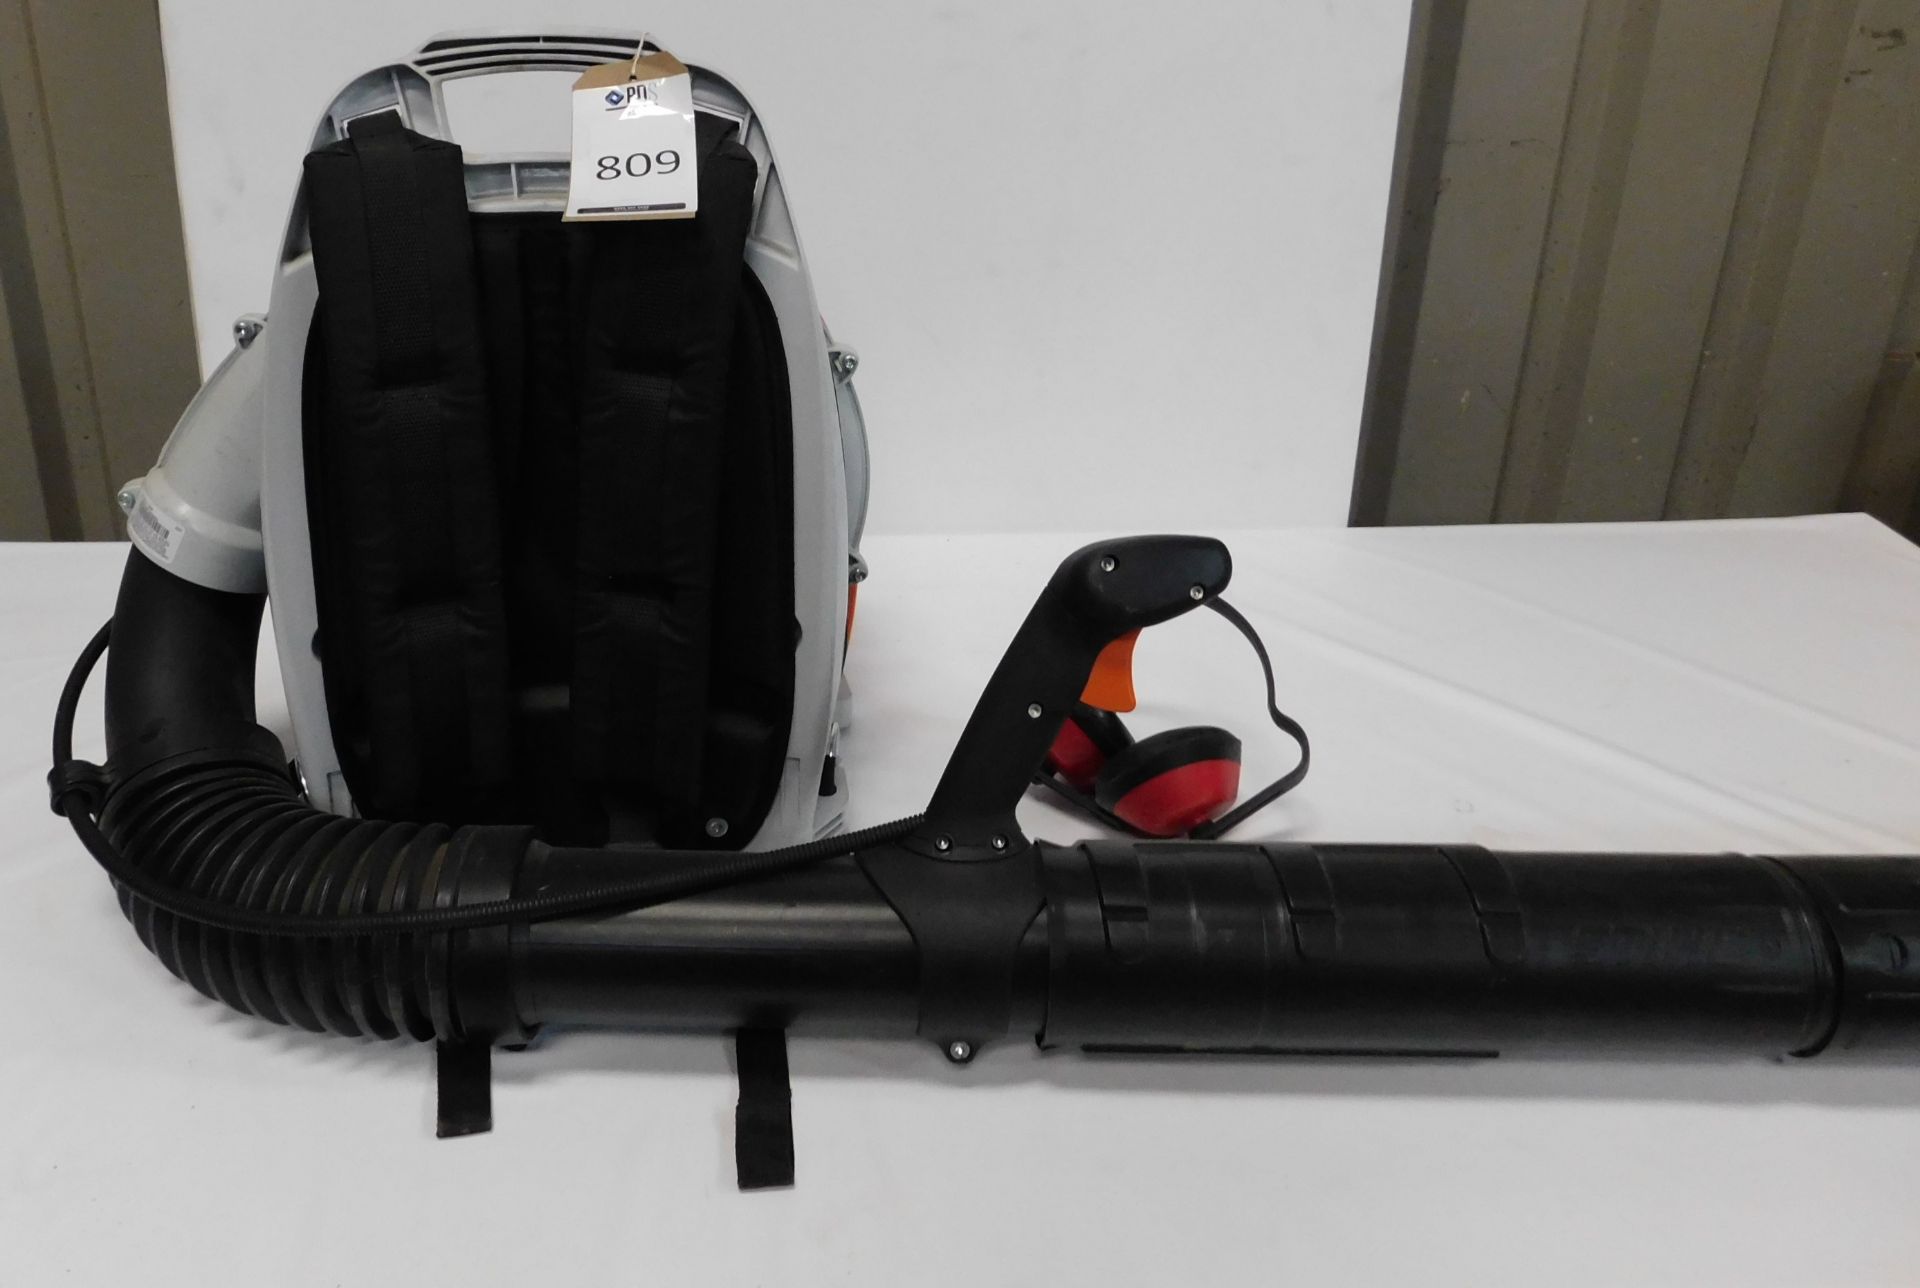 Stihl BR430 Petrol Driven Backpack Blower (Location: Brentwood. Please Refer to General Notes)